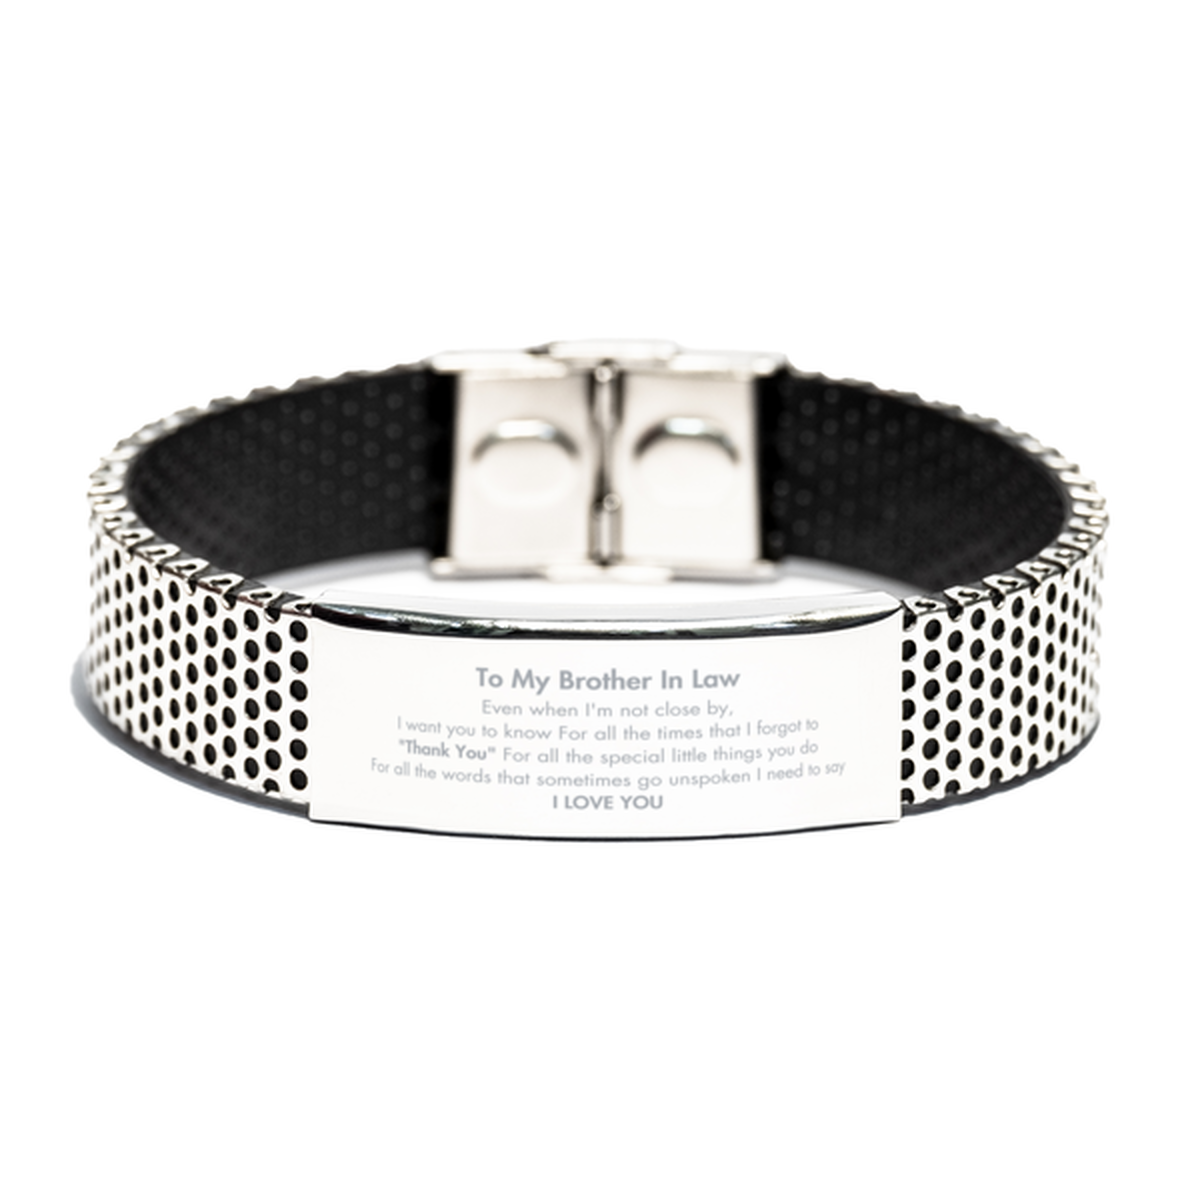 Thank You Gifts for Brother In Law, Keepsake Stainless Steel Bracelet Gifts for Brother In Law Birthday Mother's day Father's Day Brother In Law For all the words That sometimes go unspoken I need to say I LOVE YOU